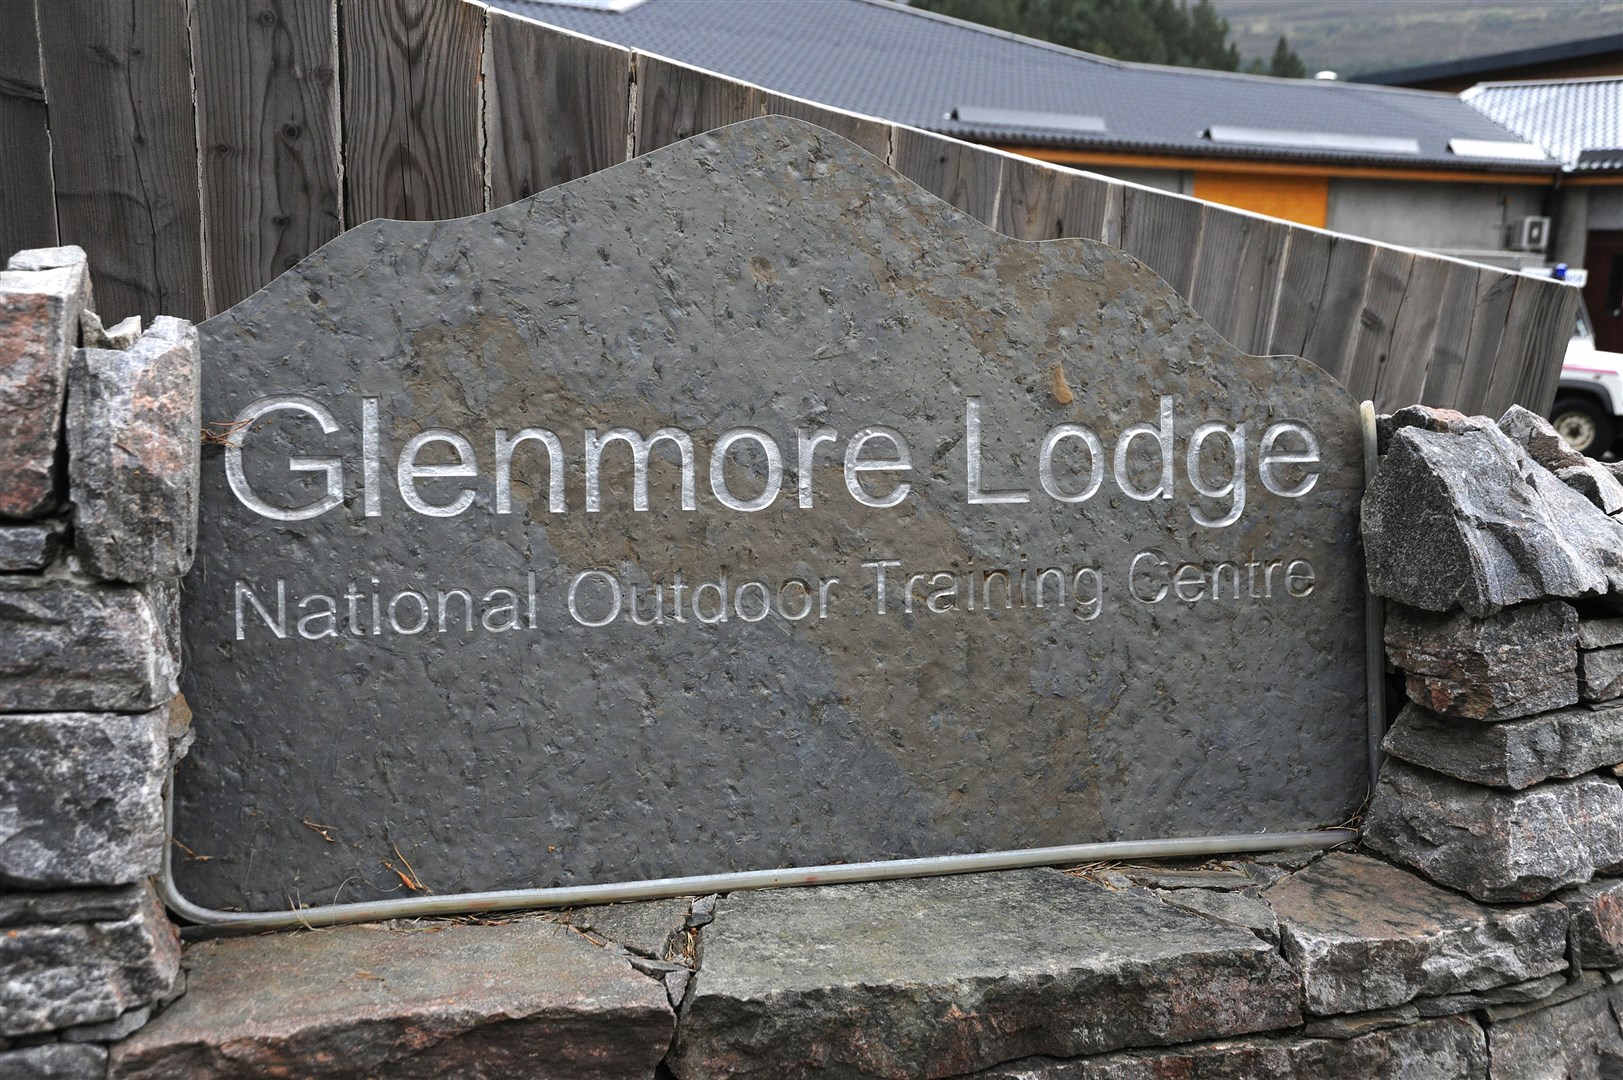 Glenmore Lodged which is home to Spors Gaidhlig